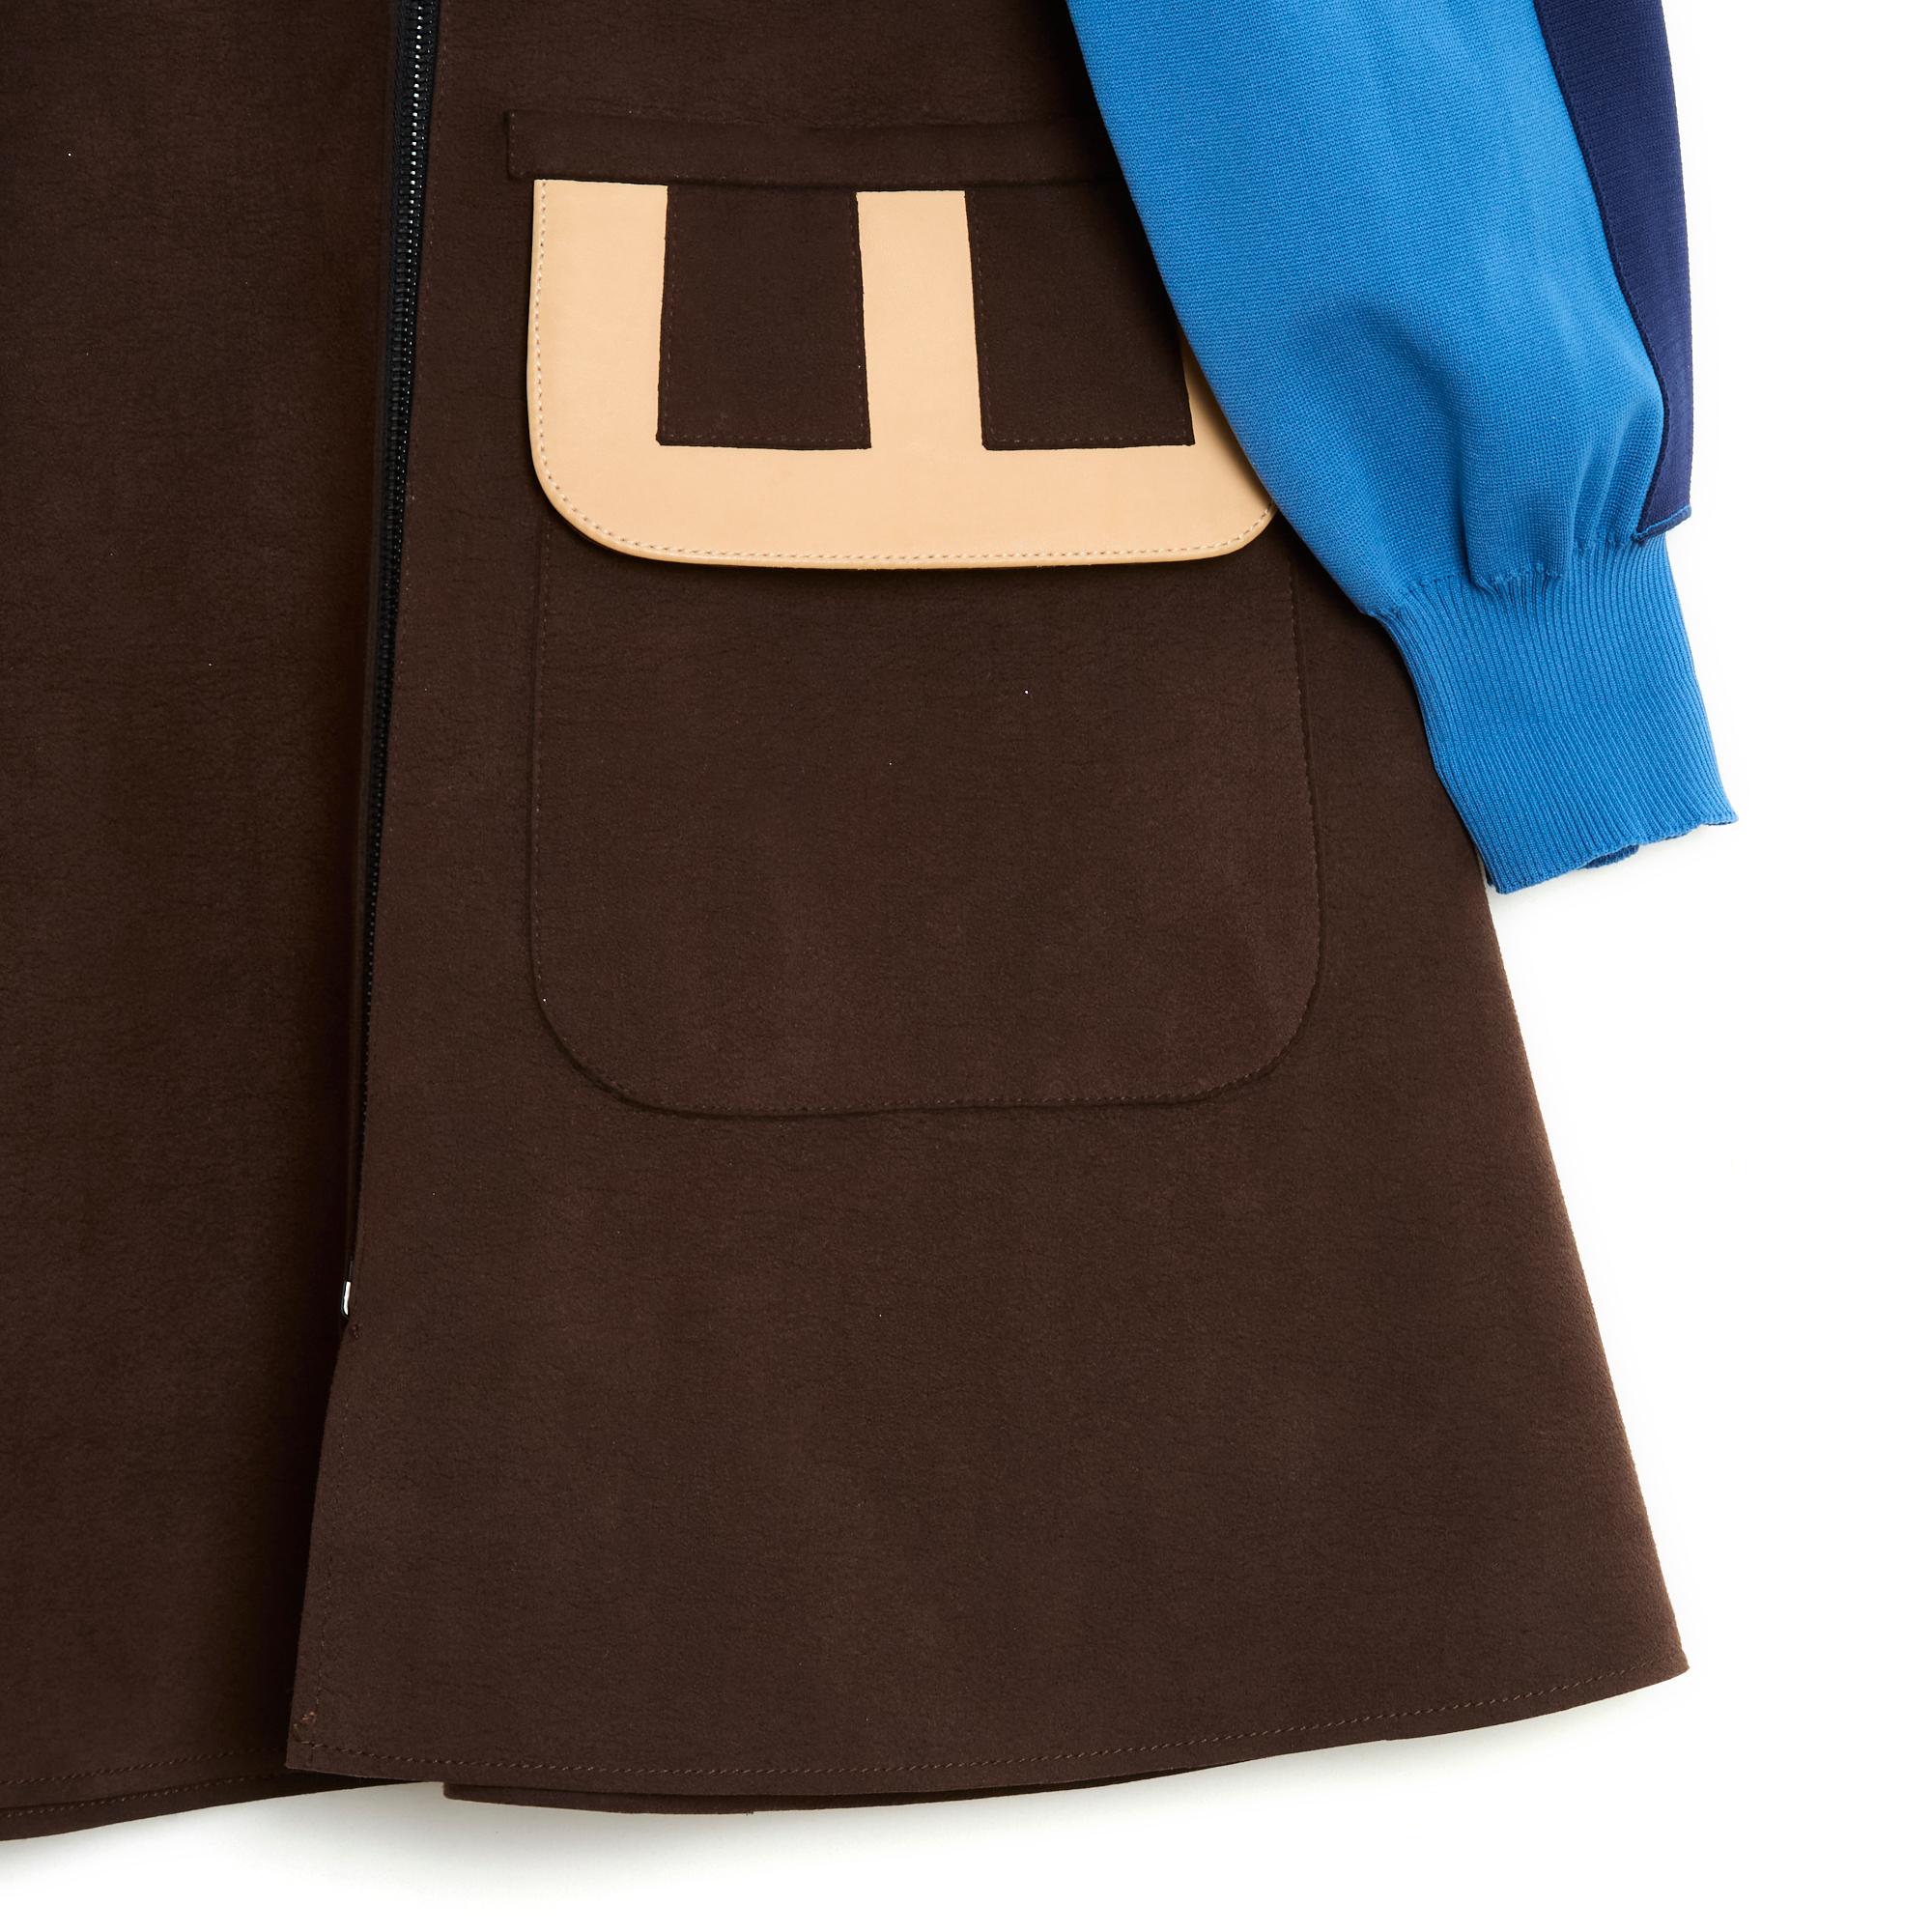 Louis Vuitton dress Fall Winter 2014 collection (by Nicolas Ghesquière), closed with a zip all over the top, the bust in wool, silk and polyamide knit probably in 2 tones of blue, the skirt, trapeze shape, in brown suede or alcantara and natural